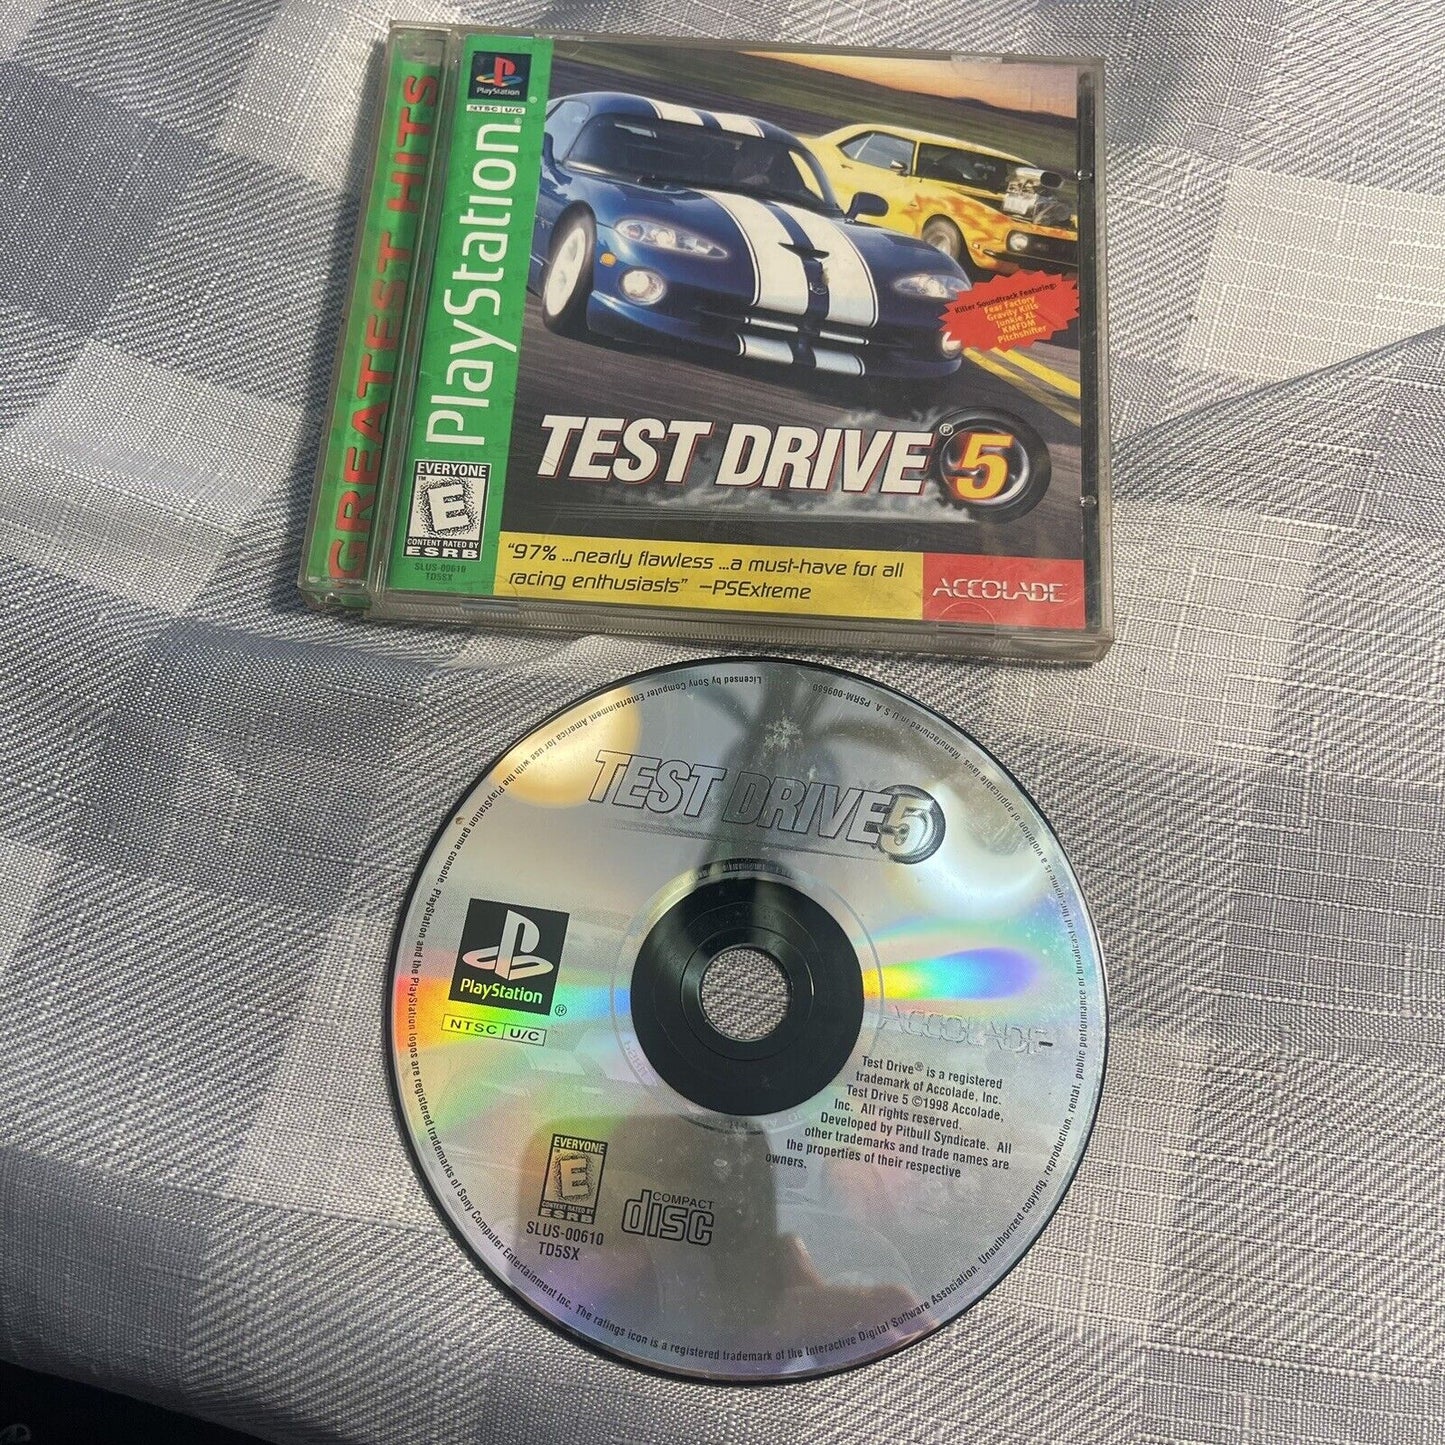 TEST DRIVE 5 - Sony PlayStation Greatest Hits PS1 1998 CIB Complete Great Cond